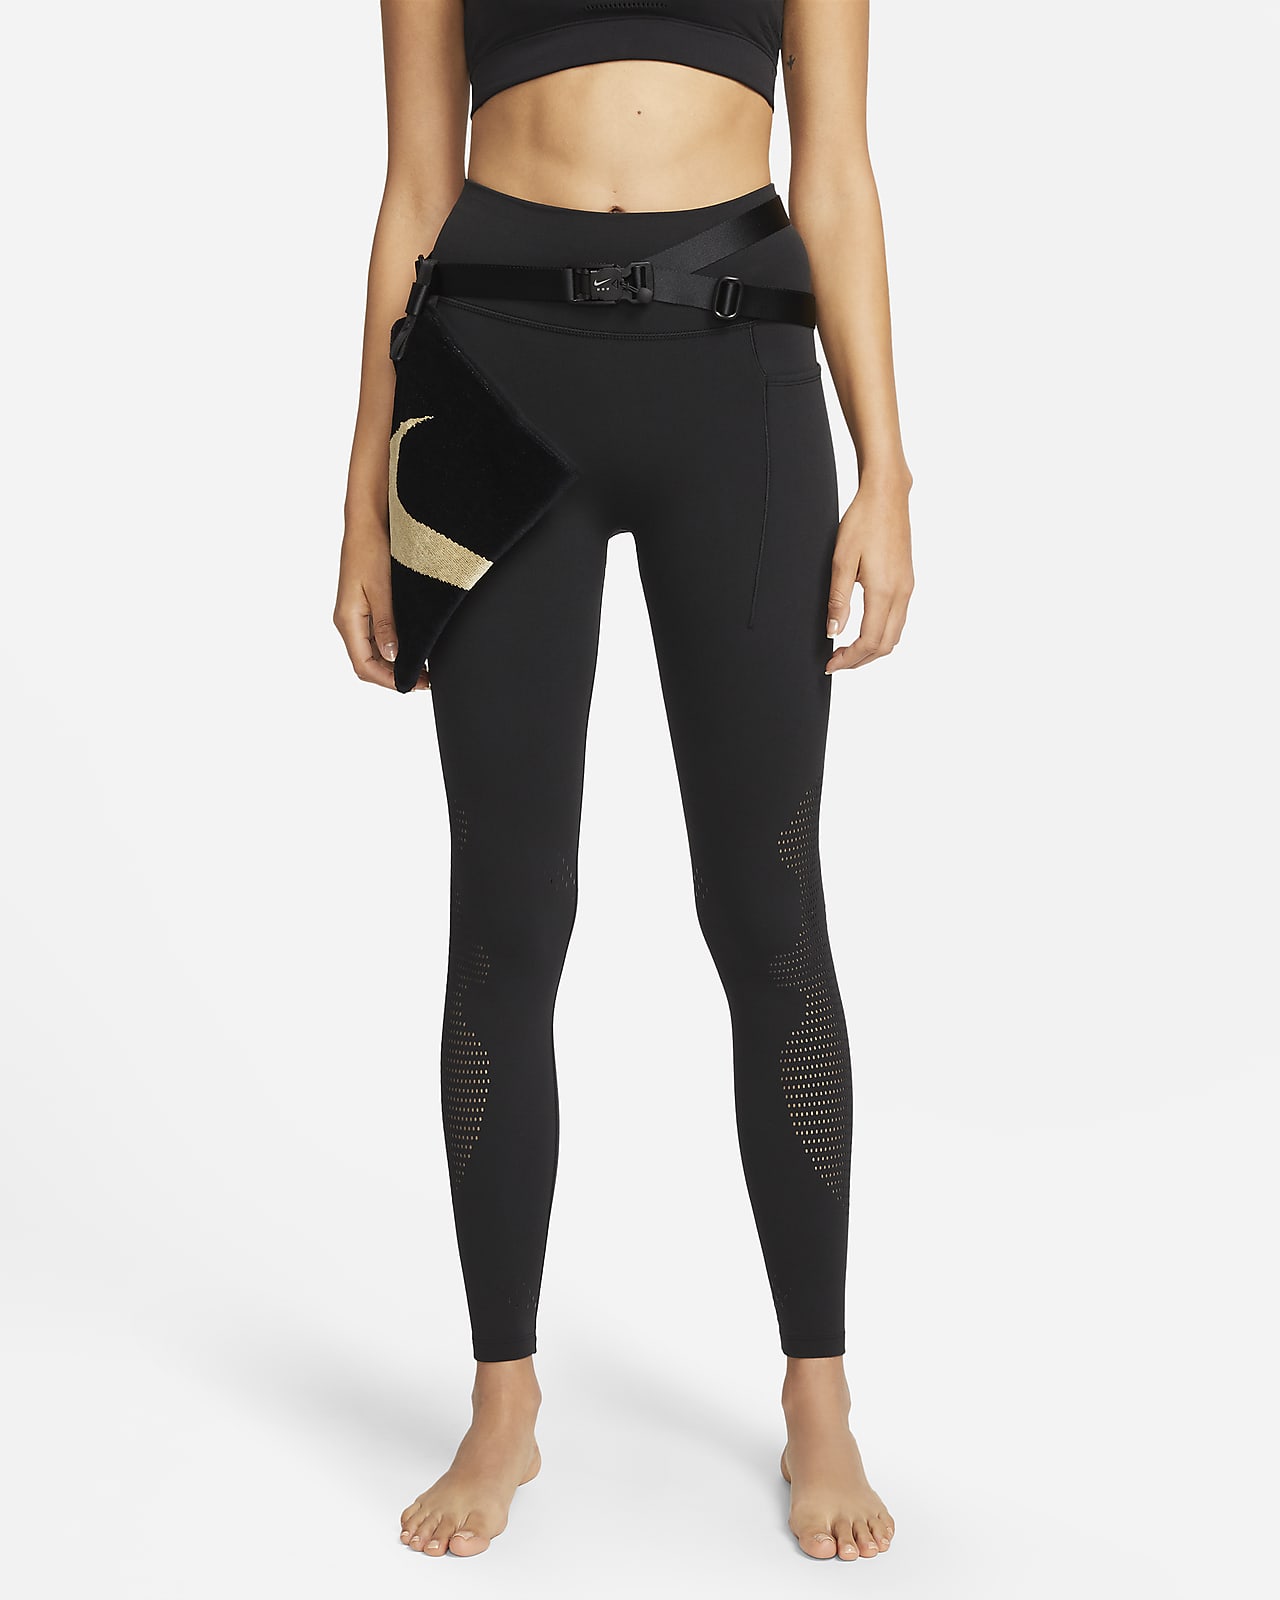 Nike - Nike X MMW Leggings  HBX - Globally Curated Fashion and Lifestyle  by Hypebeast